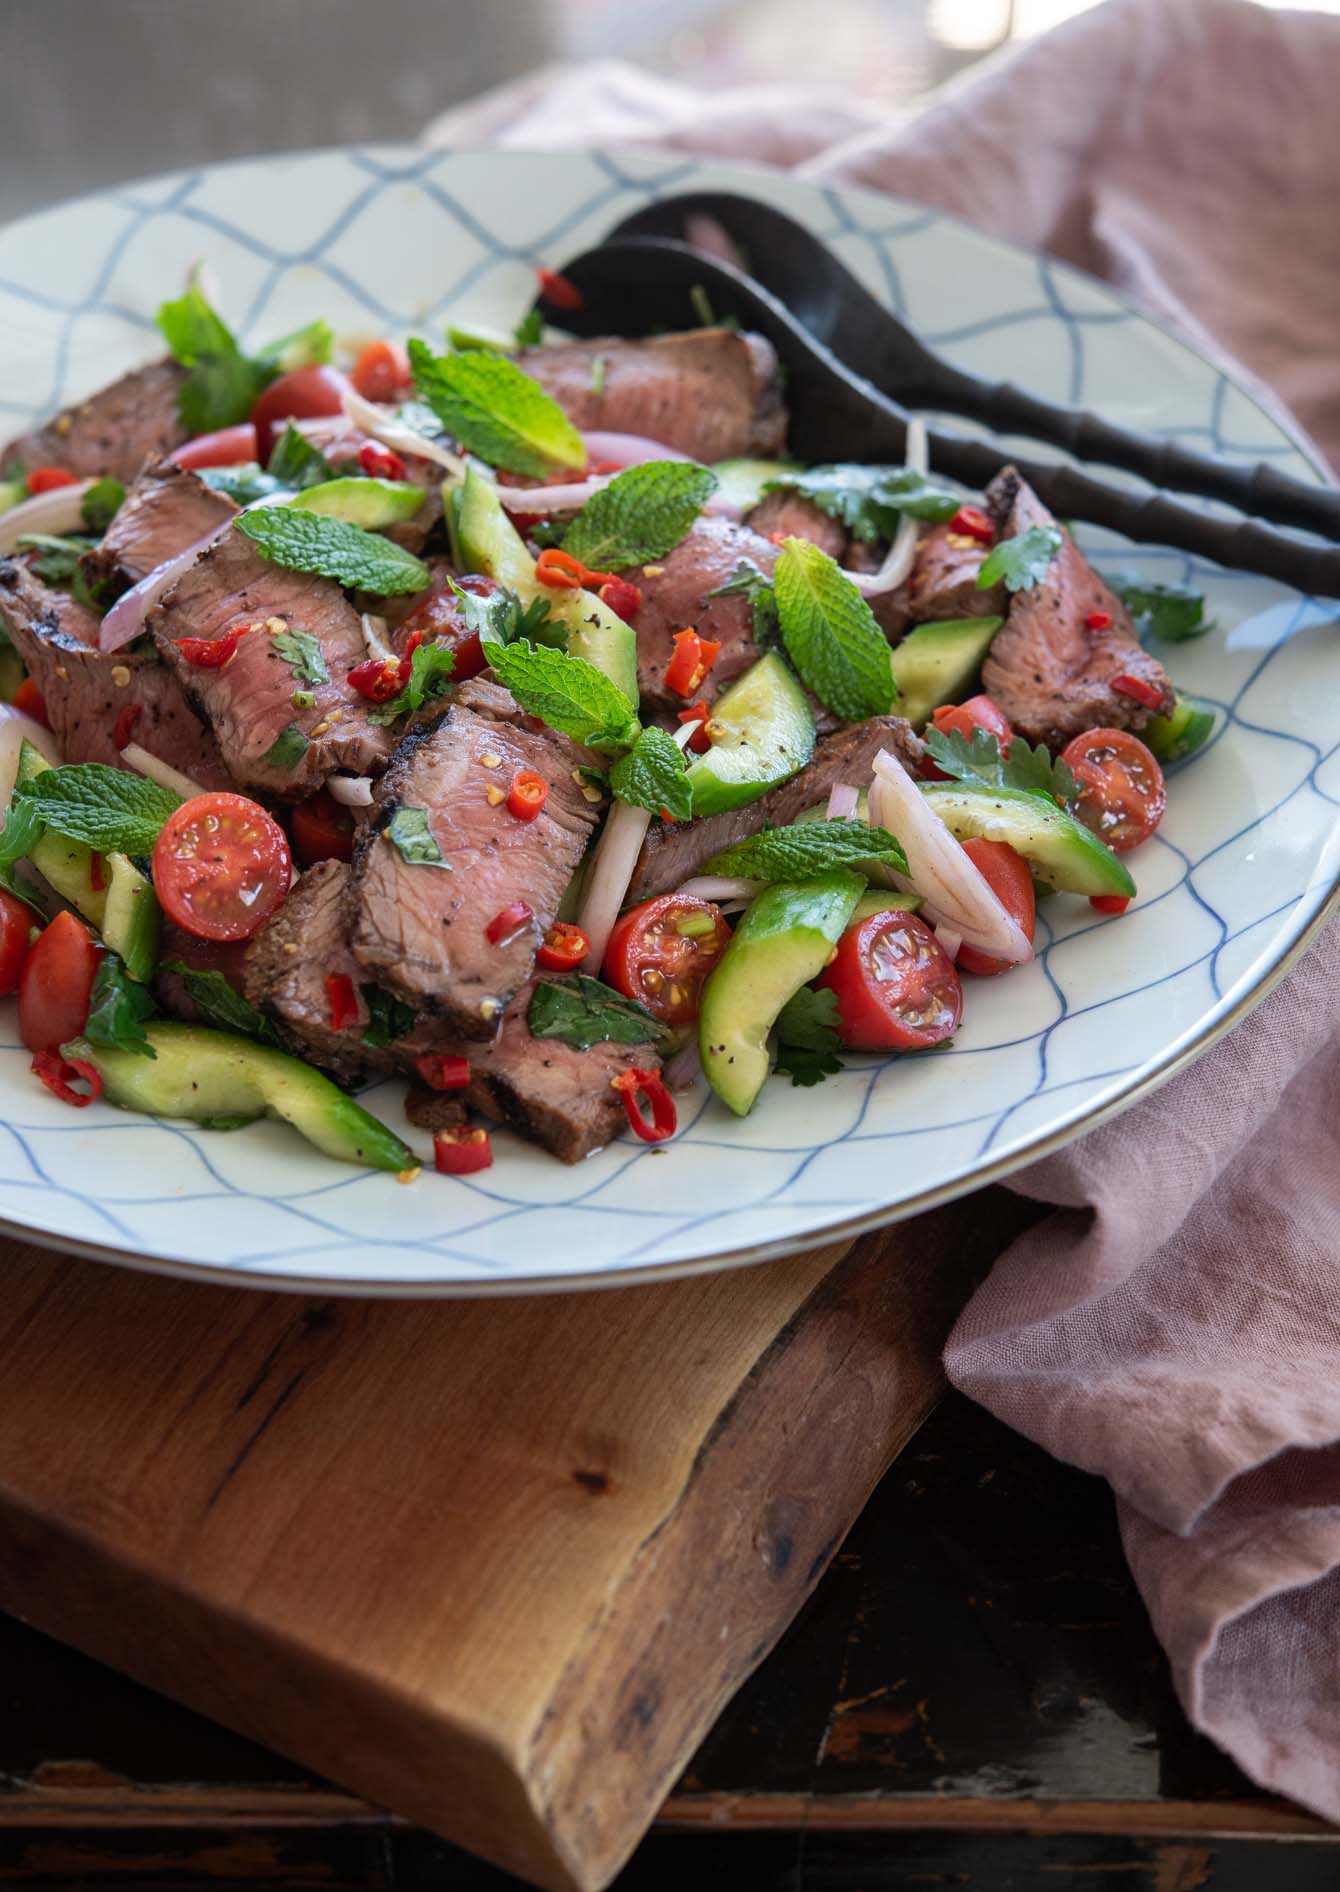 Thai beef salad made with beef steak and fresh herbs on a platter.